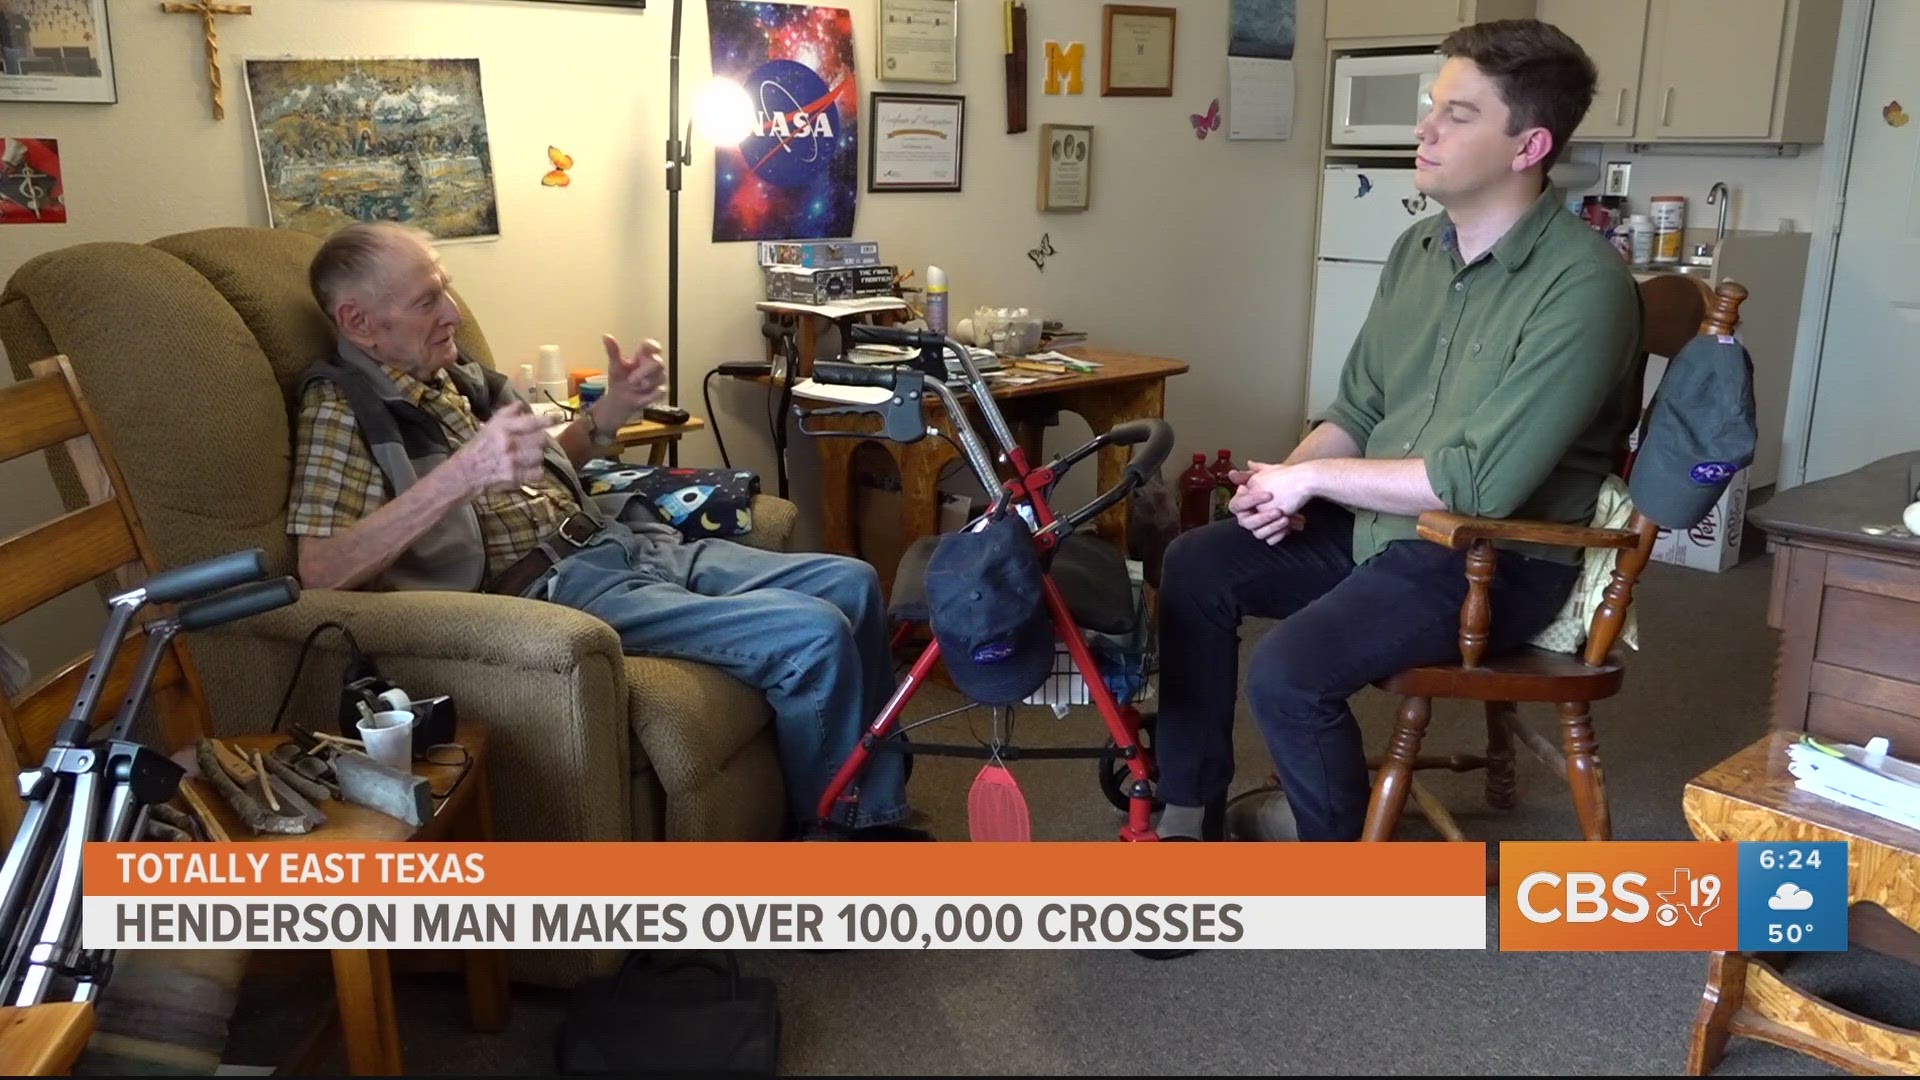 Fred Meissner says he's made between 100,000 and 150,000 crosses over the past 30 years.